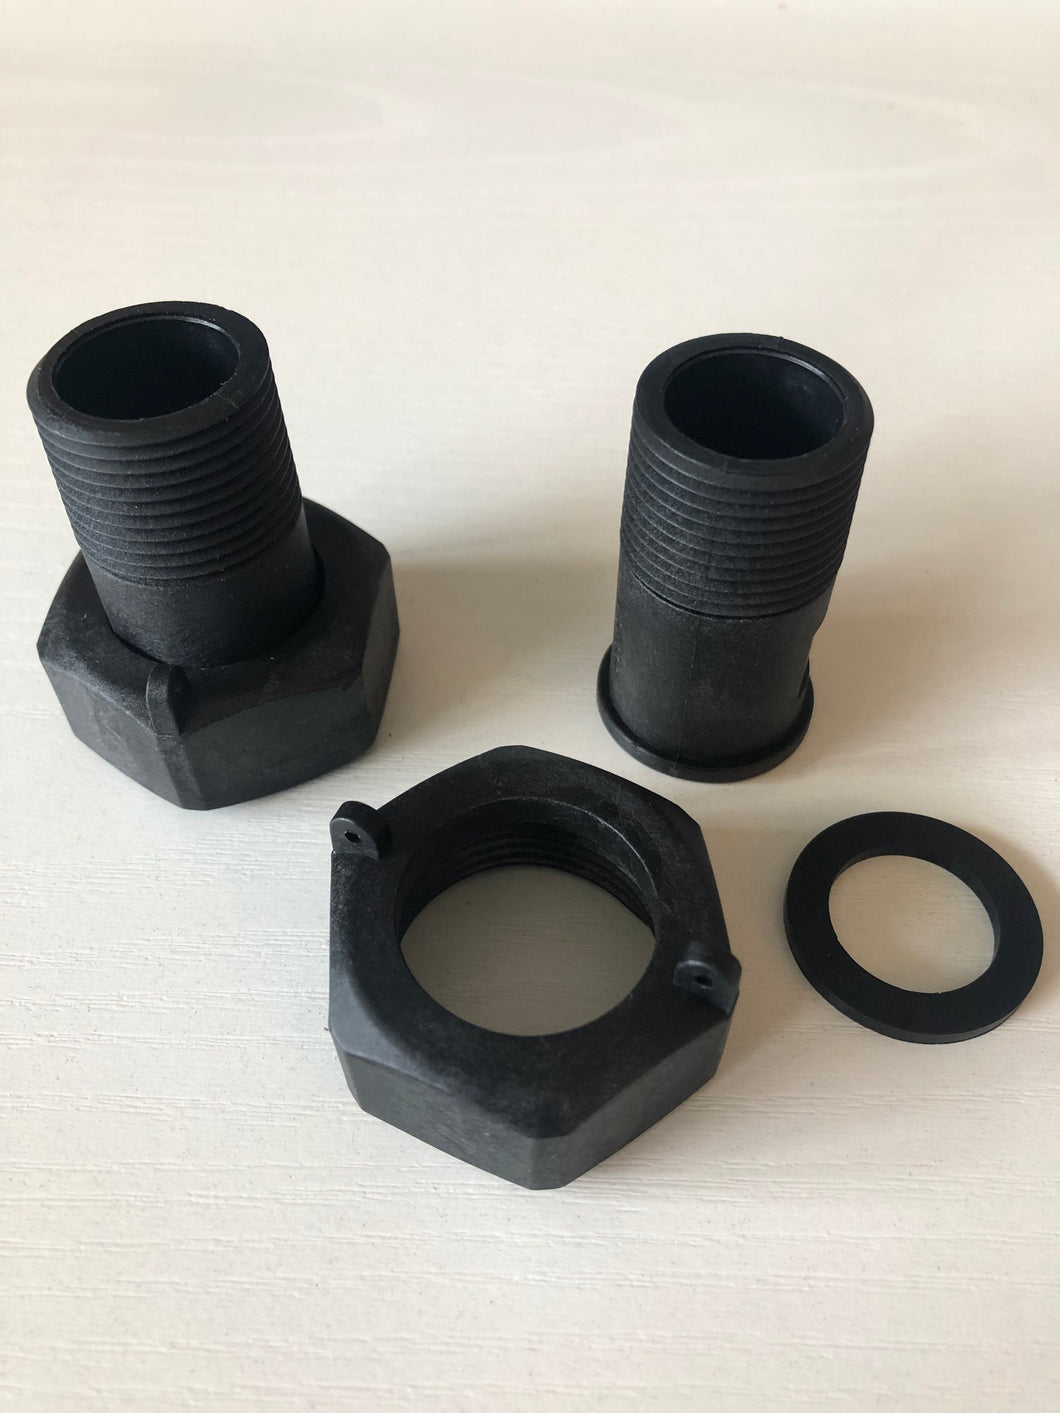 Polymer couplings will allow for polymer water meters to be connected to brass, pex or any other type of plumbing material